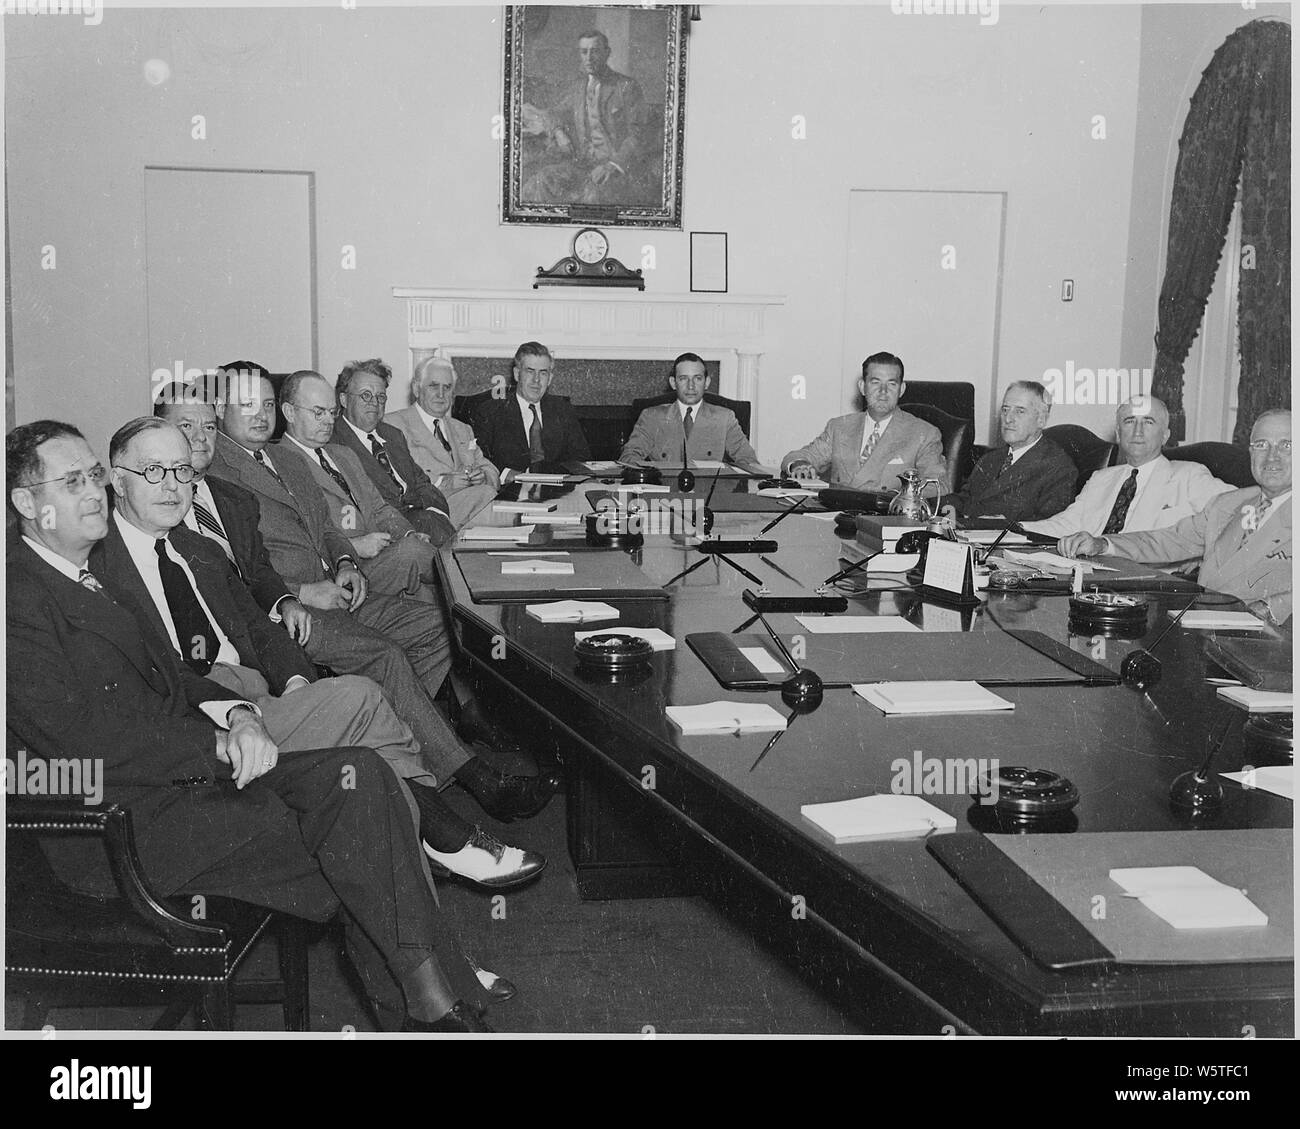 Photograph of Cabinet meeting at the White House: (from left to right) Secretary of Agriculture Clinton P. Anderson; Secretary of Labor Lewis Schwellenbach; John Blandford, Jr. of the National Housing Agency; Julius Krug of the War Production Board; John Snyder of the Office of War Mobilization and Reconversion; William H. Davis of the Office of Economic Stabilization; Leo T. Crowley of the Foreign Economic Administration; Secretary of Commerce Henry A. Wallace; Under Secretary of the Interior Abe Fortas; Postmaster General Robert Hannegan; Secretary of War Henry Stimson; Secretary of State Ja Stock Photo